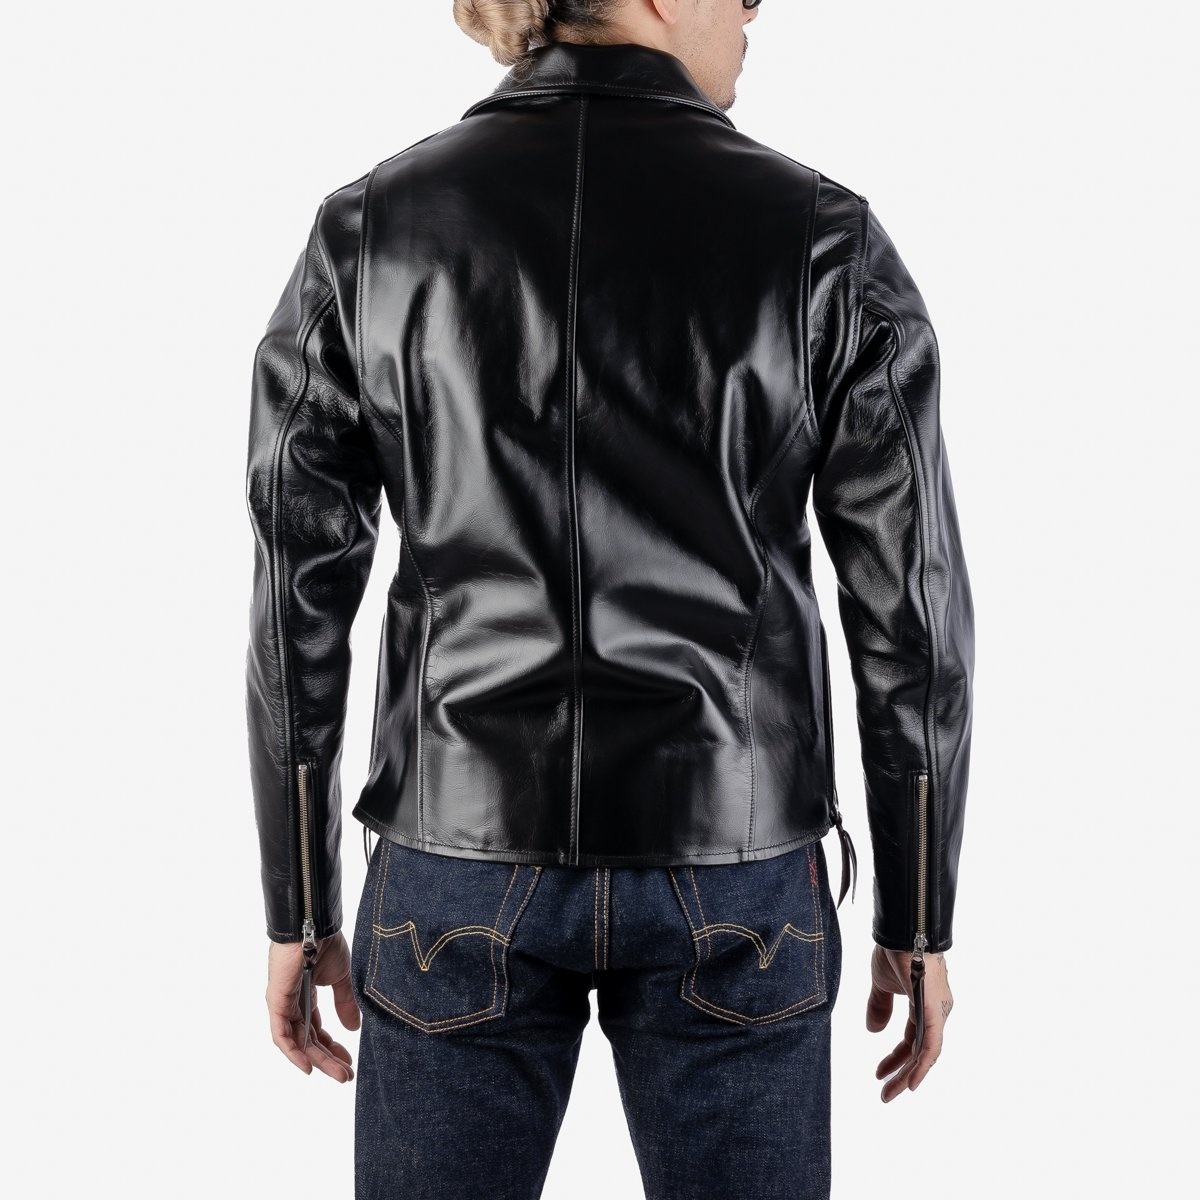 IHJ-54-BLK Japanese Horsehide Rider’s Jacket with Collar - Black (Tea-Core Dyed) - 3